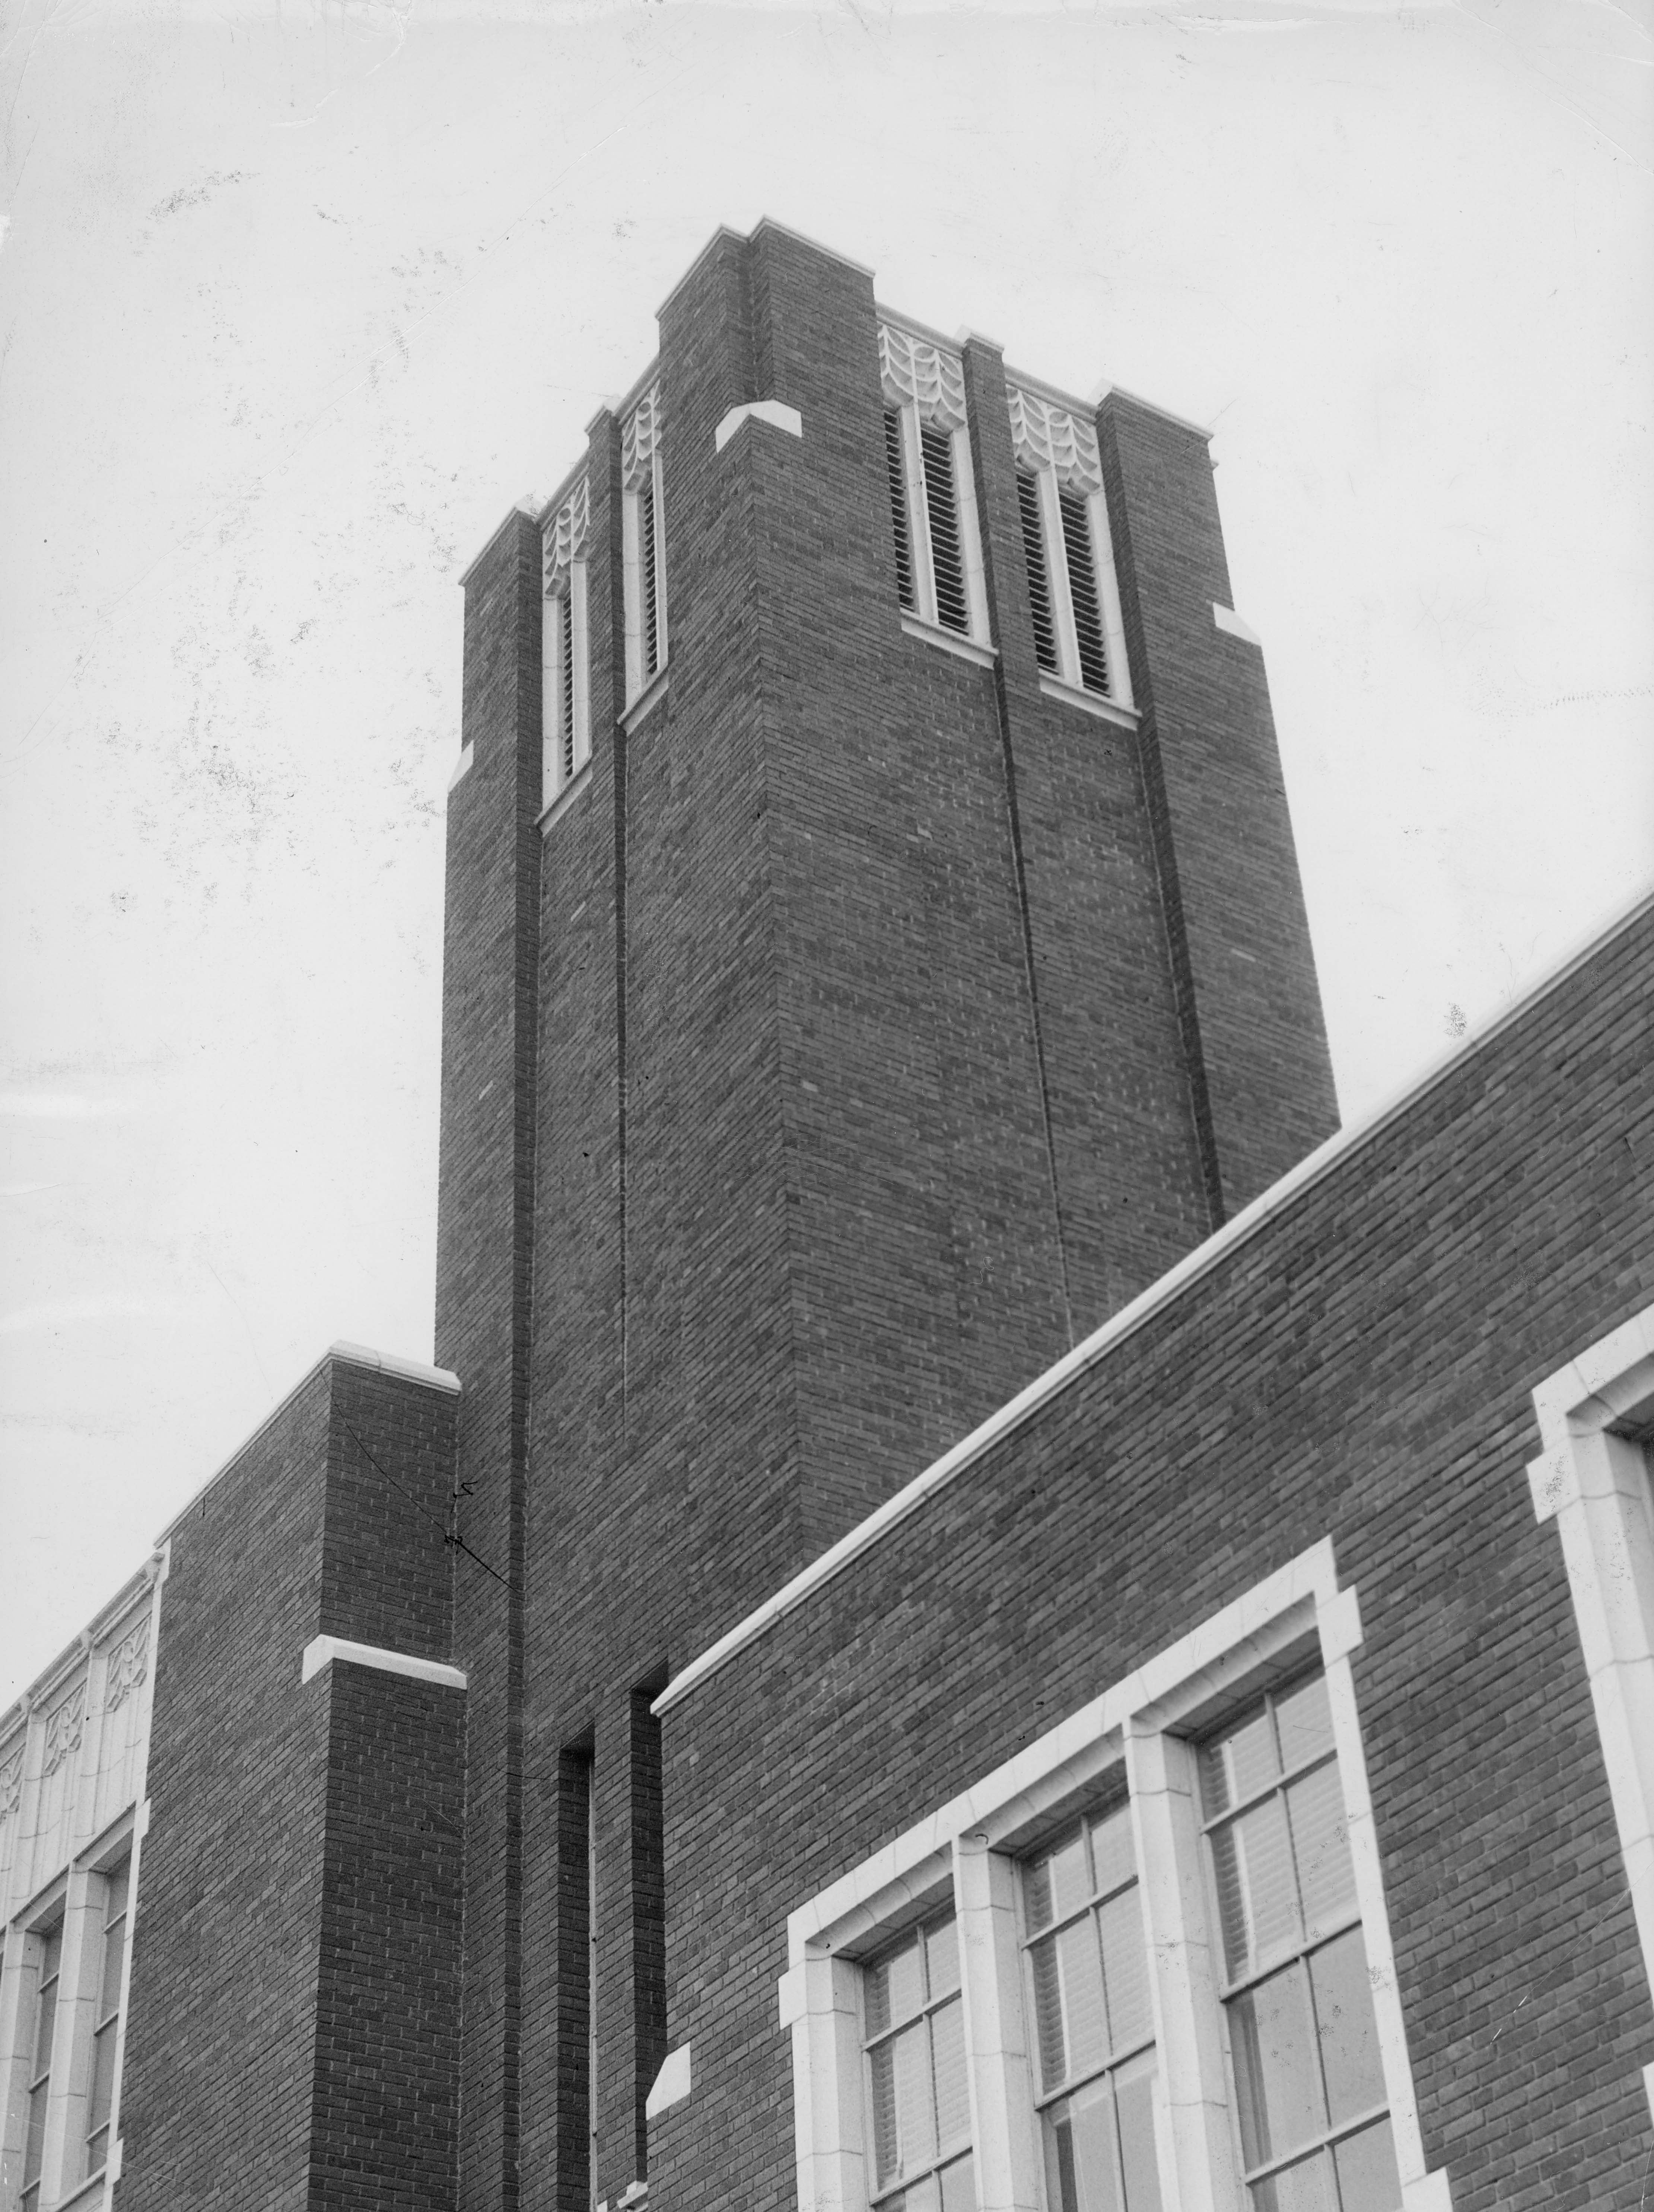 Black and white photo of brick tower containing Boise State's carillon bells